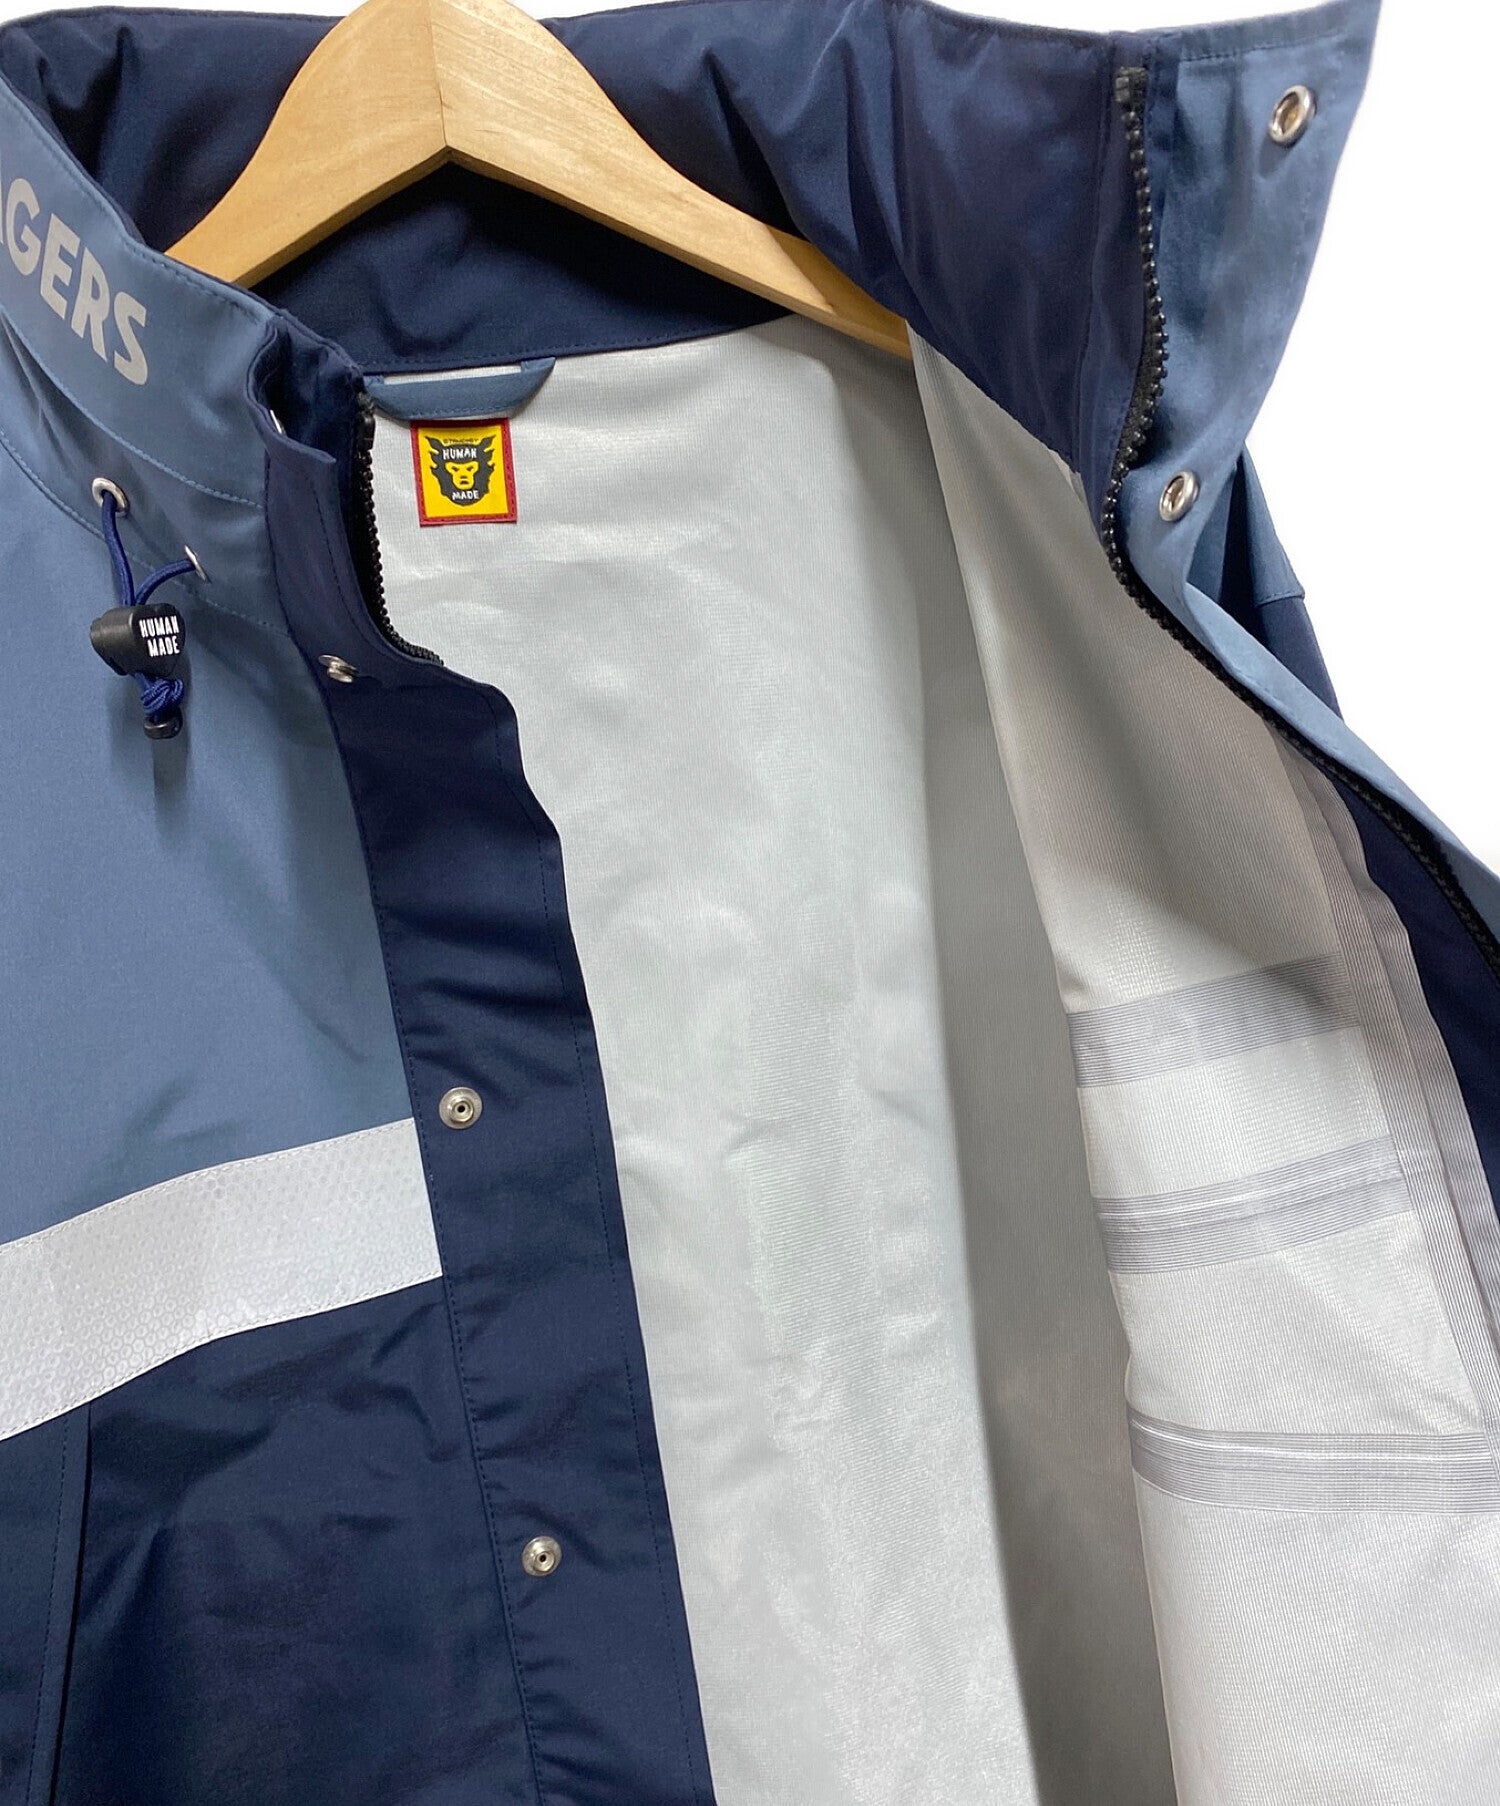 Archive Factory Human Made Fire Jacket